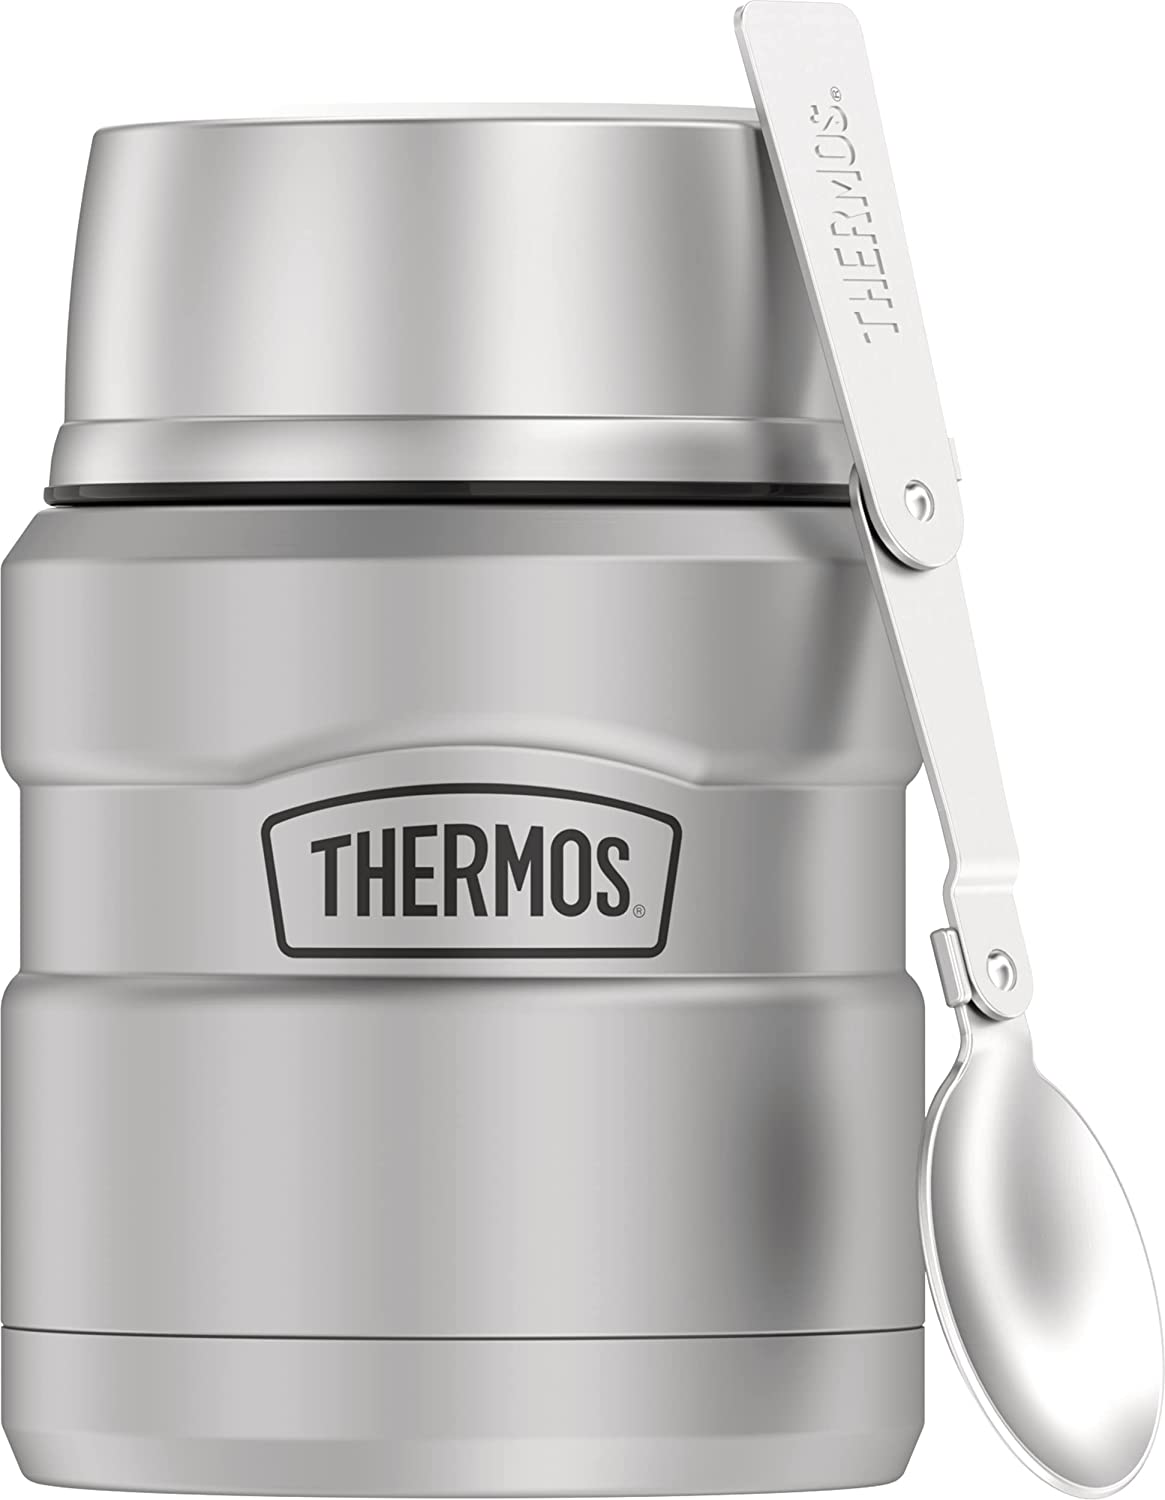 Thermos Sweat-Proof Soup Thermos, 16-Ounce